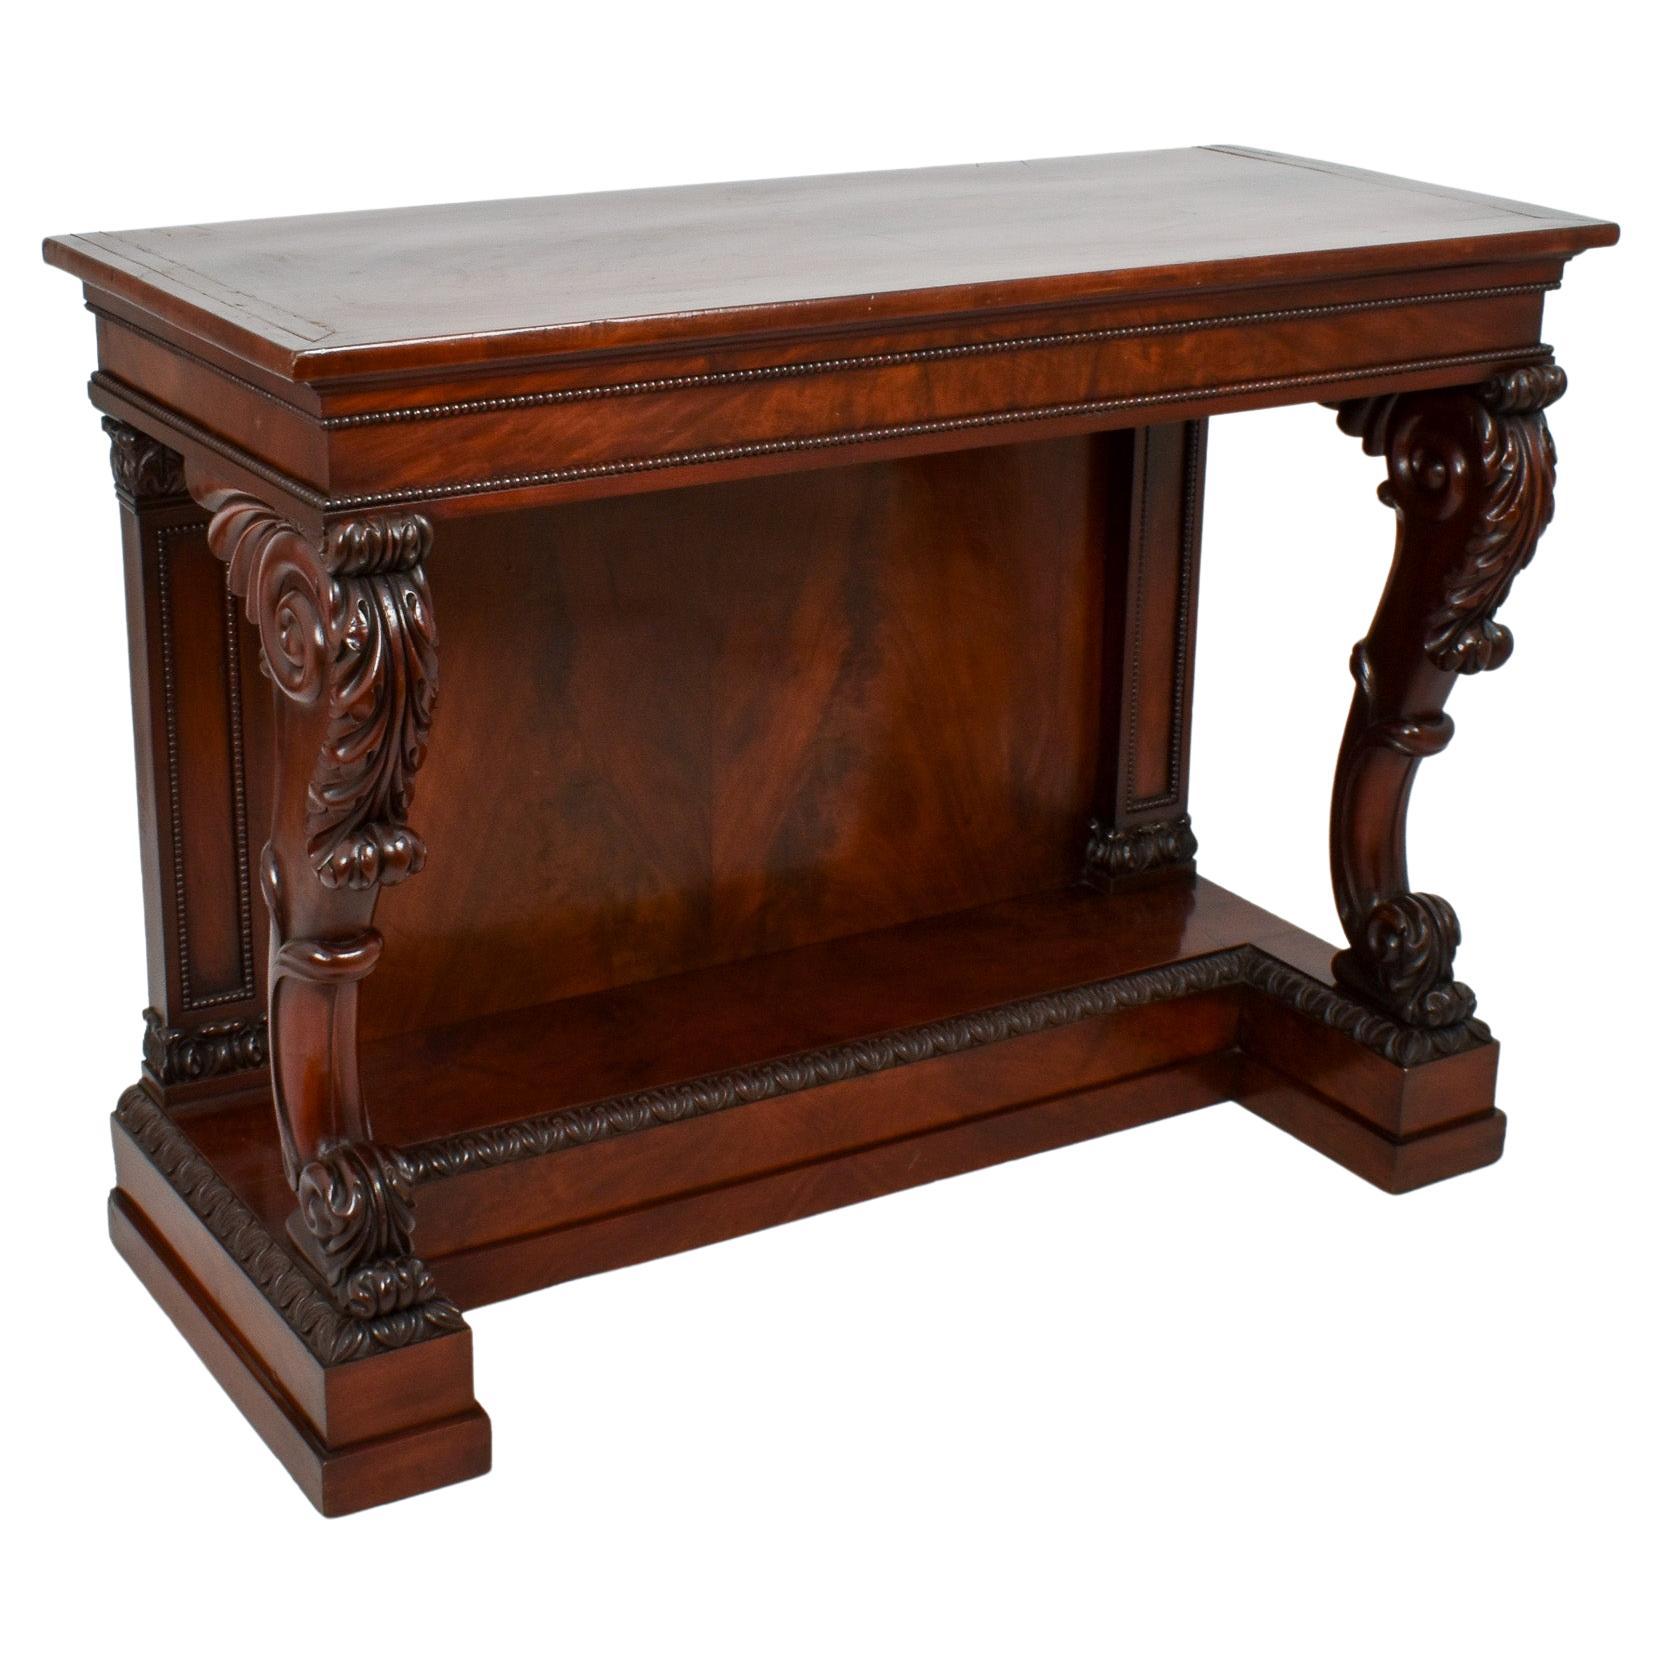 Exceptional Pair of William IV Mahogany Console Tables, circa 1840 For Sale